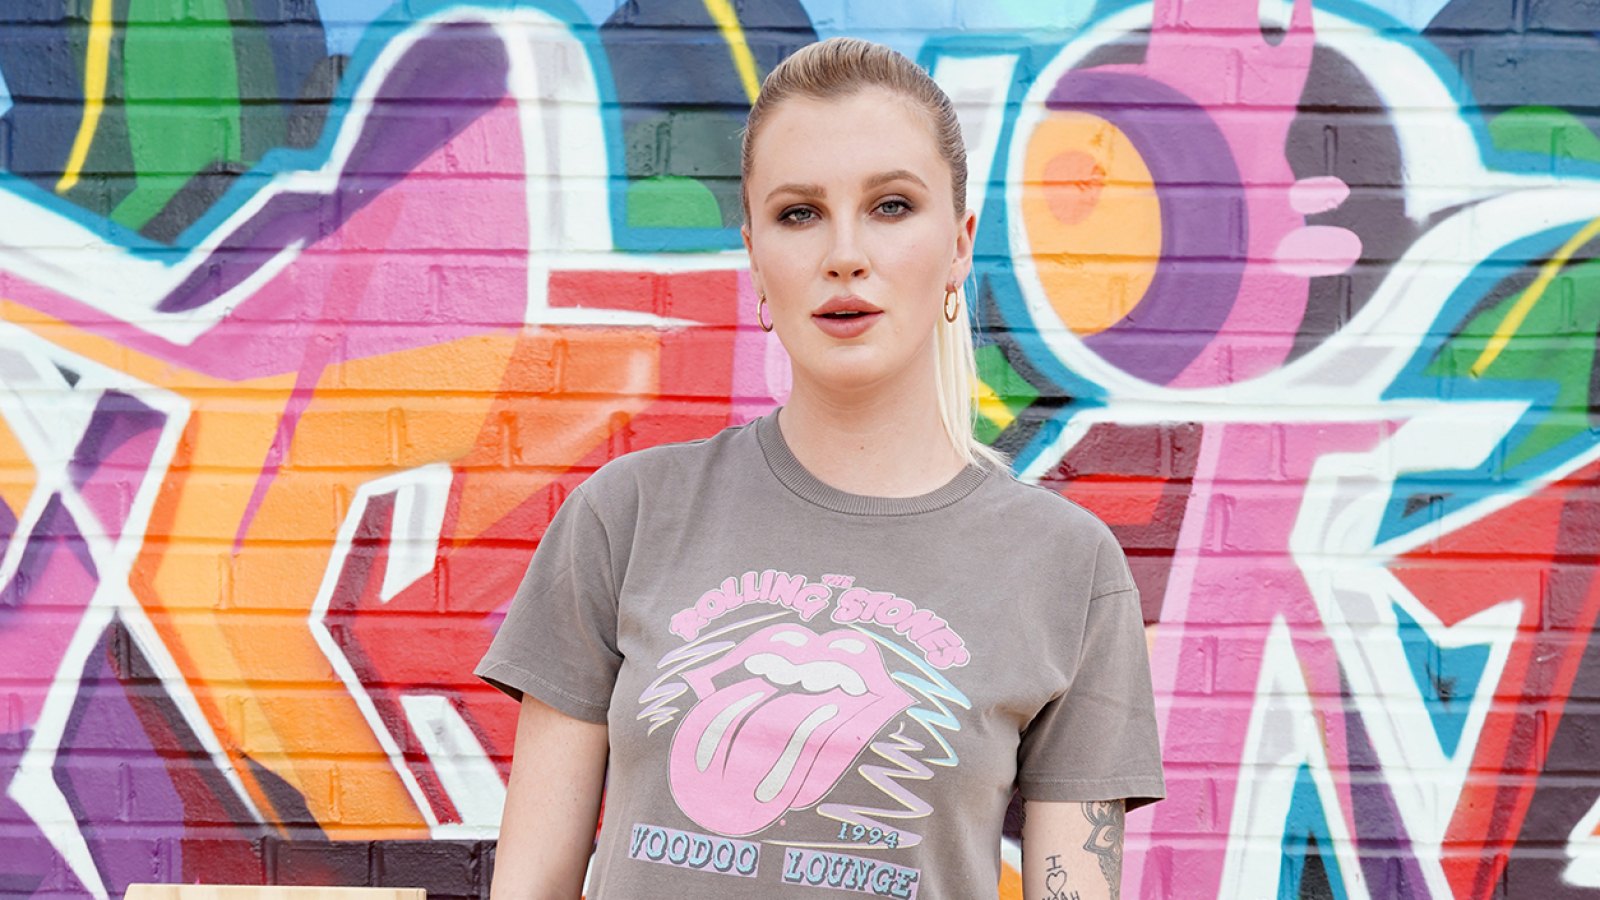 Ireland Baldwin Credits Cheesecake Factory Bread for Fuller Chest